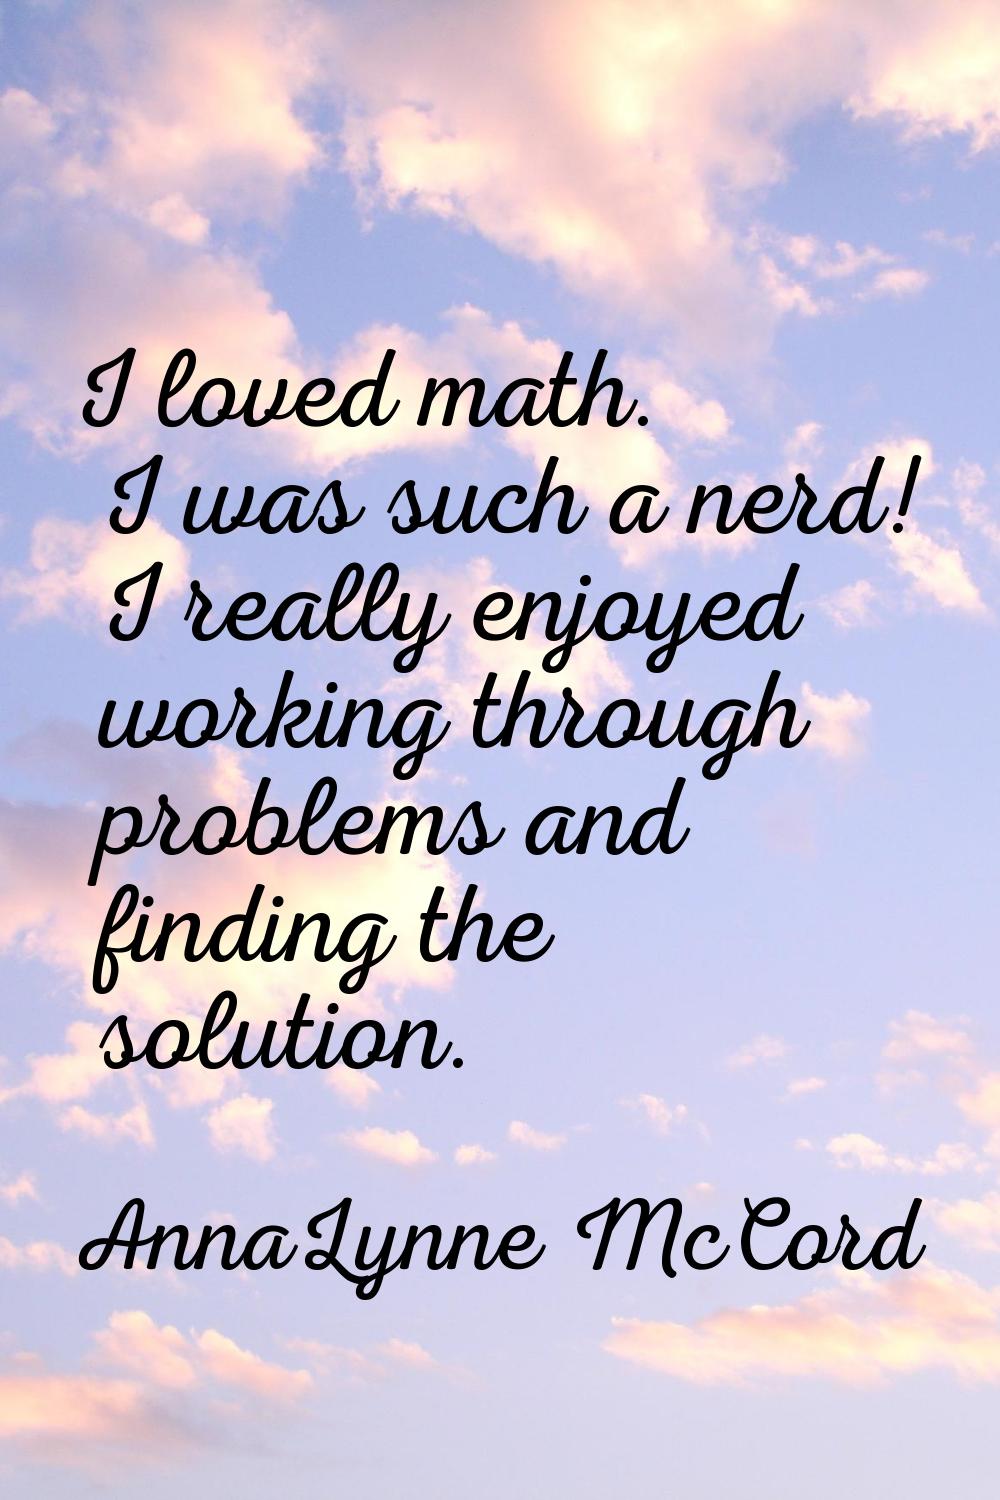 I loved math. I was such a nerd! I really enjoyed working through problems and finding the solution